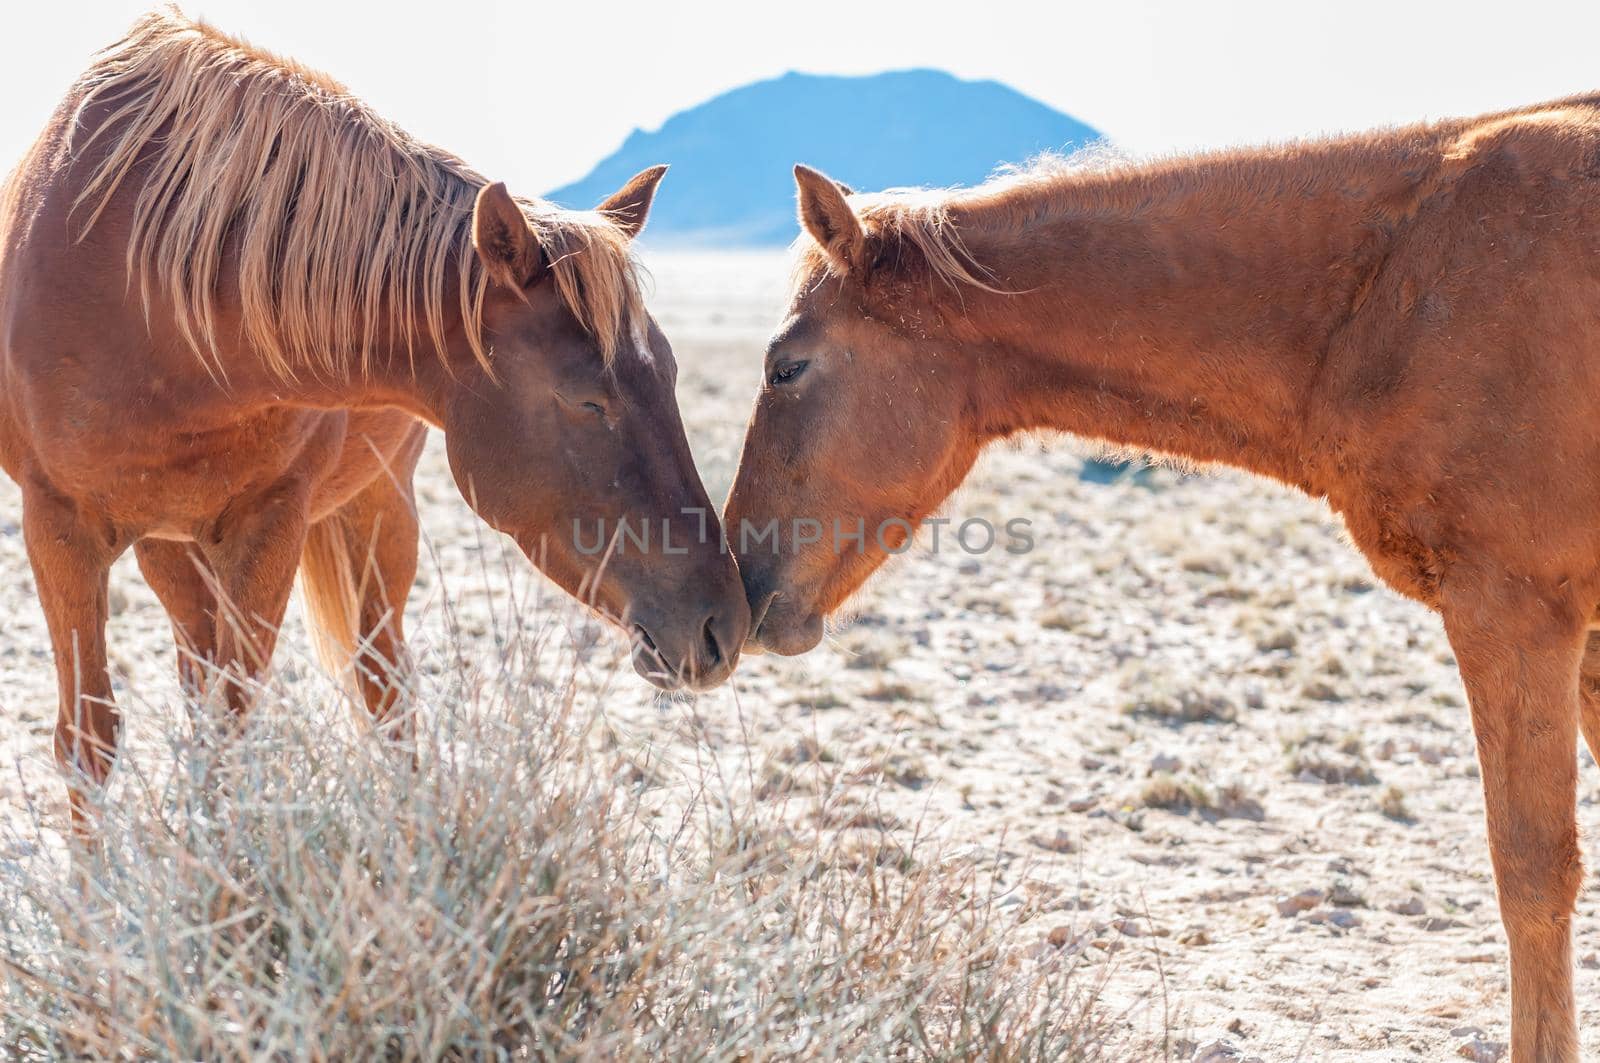 Social interaction between two wild horses of the Namib by dpreezg